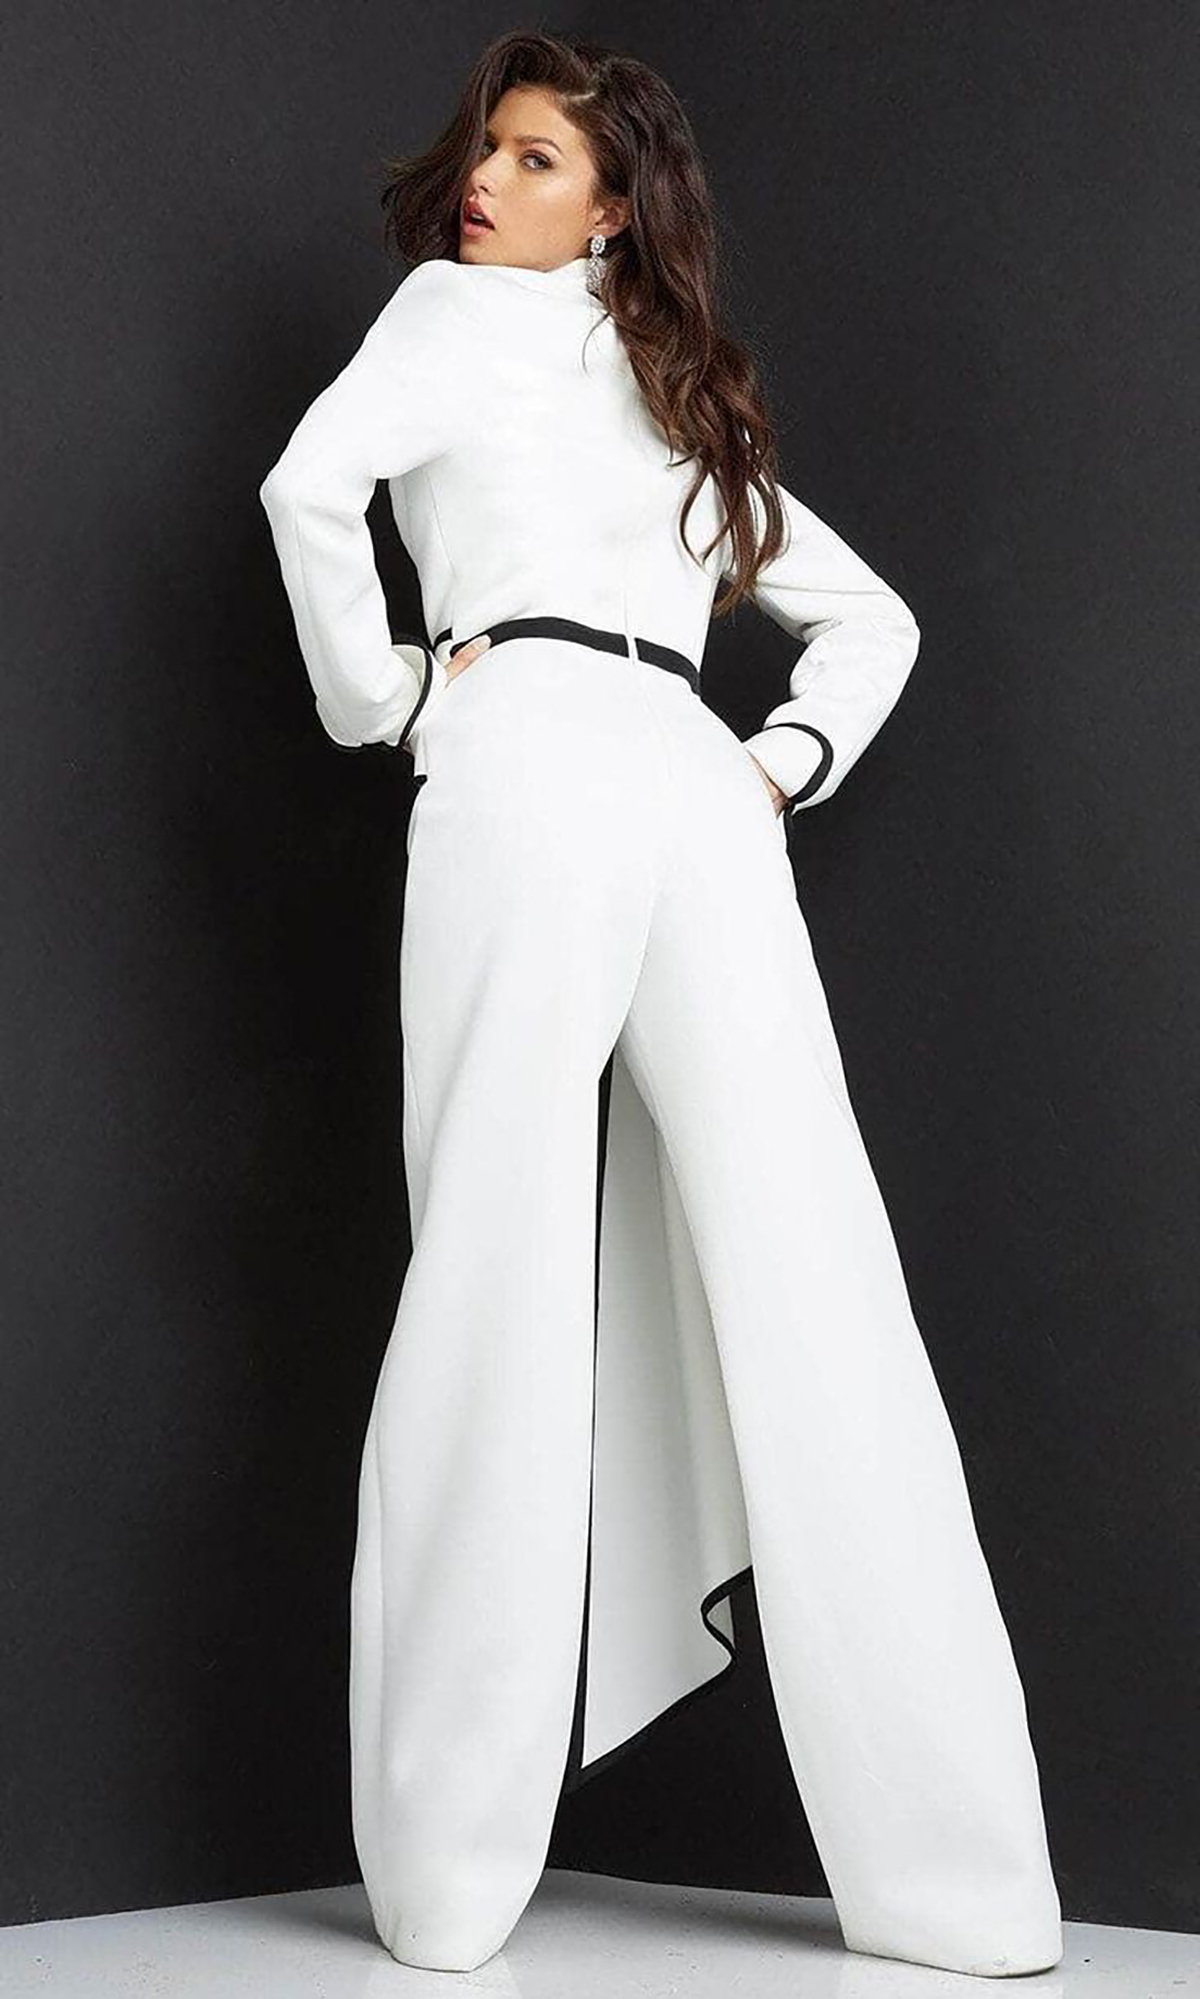 Red Carpet Fashion Women Pants Suits Color Matching White Black Wedding Suit Prom Evening Party Wear 